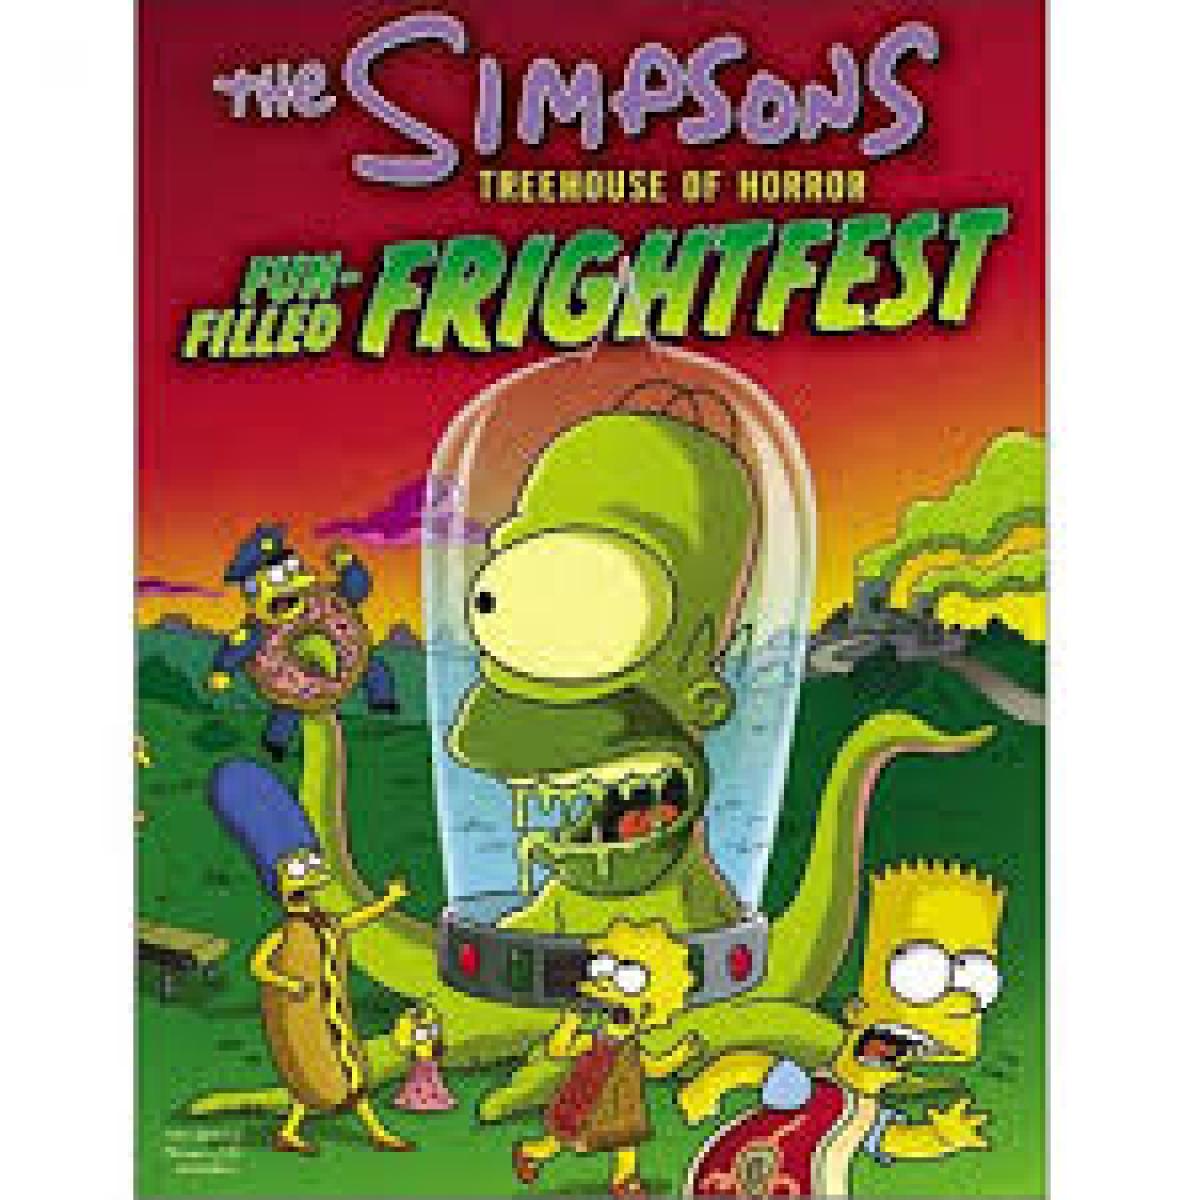 The Simpsons: Treehouse of Horror Fun-Filled Frightfest